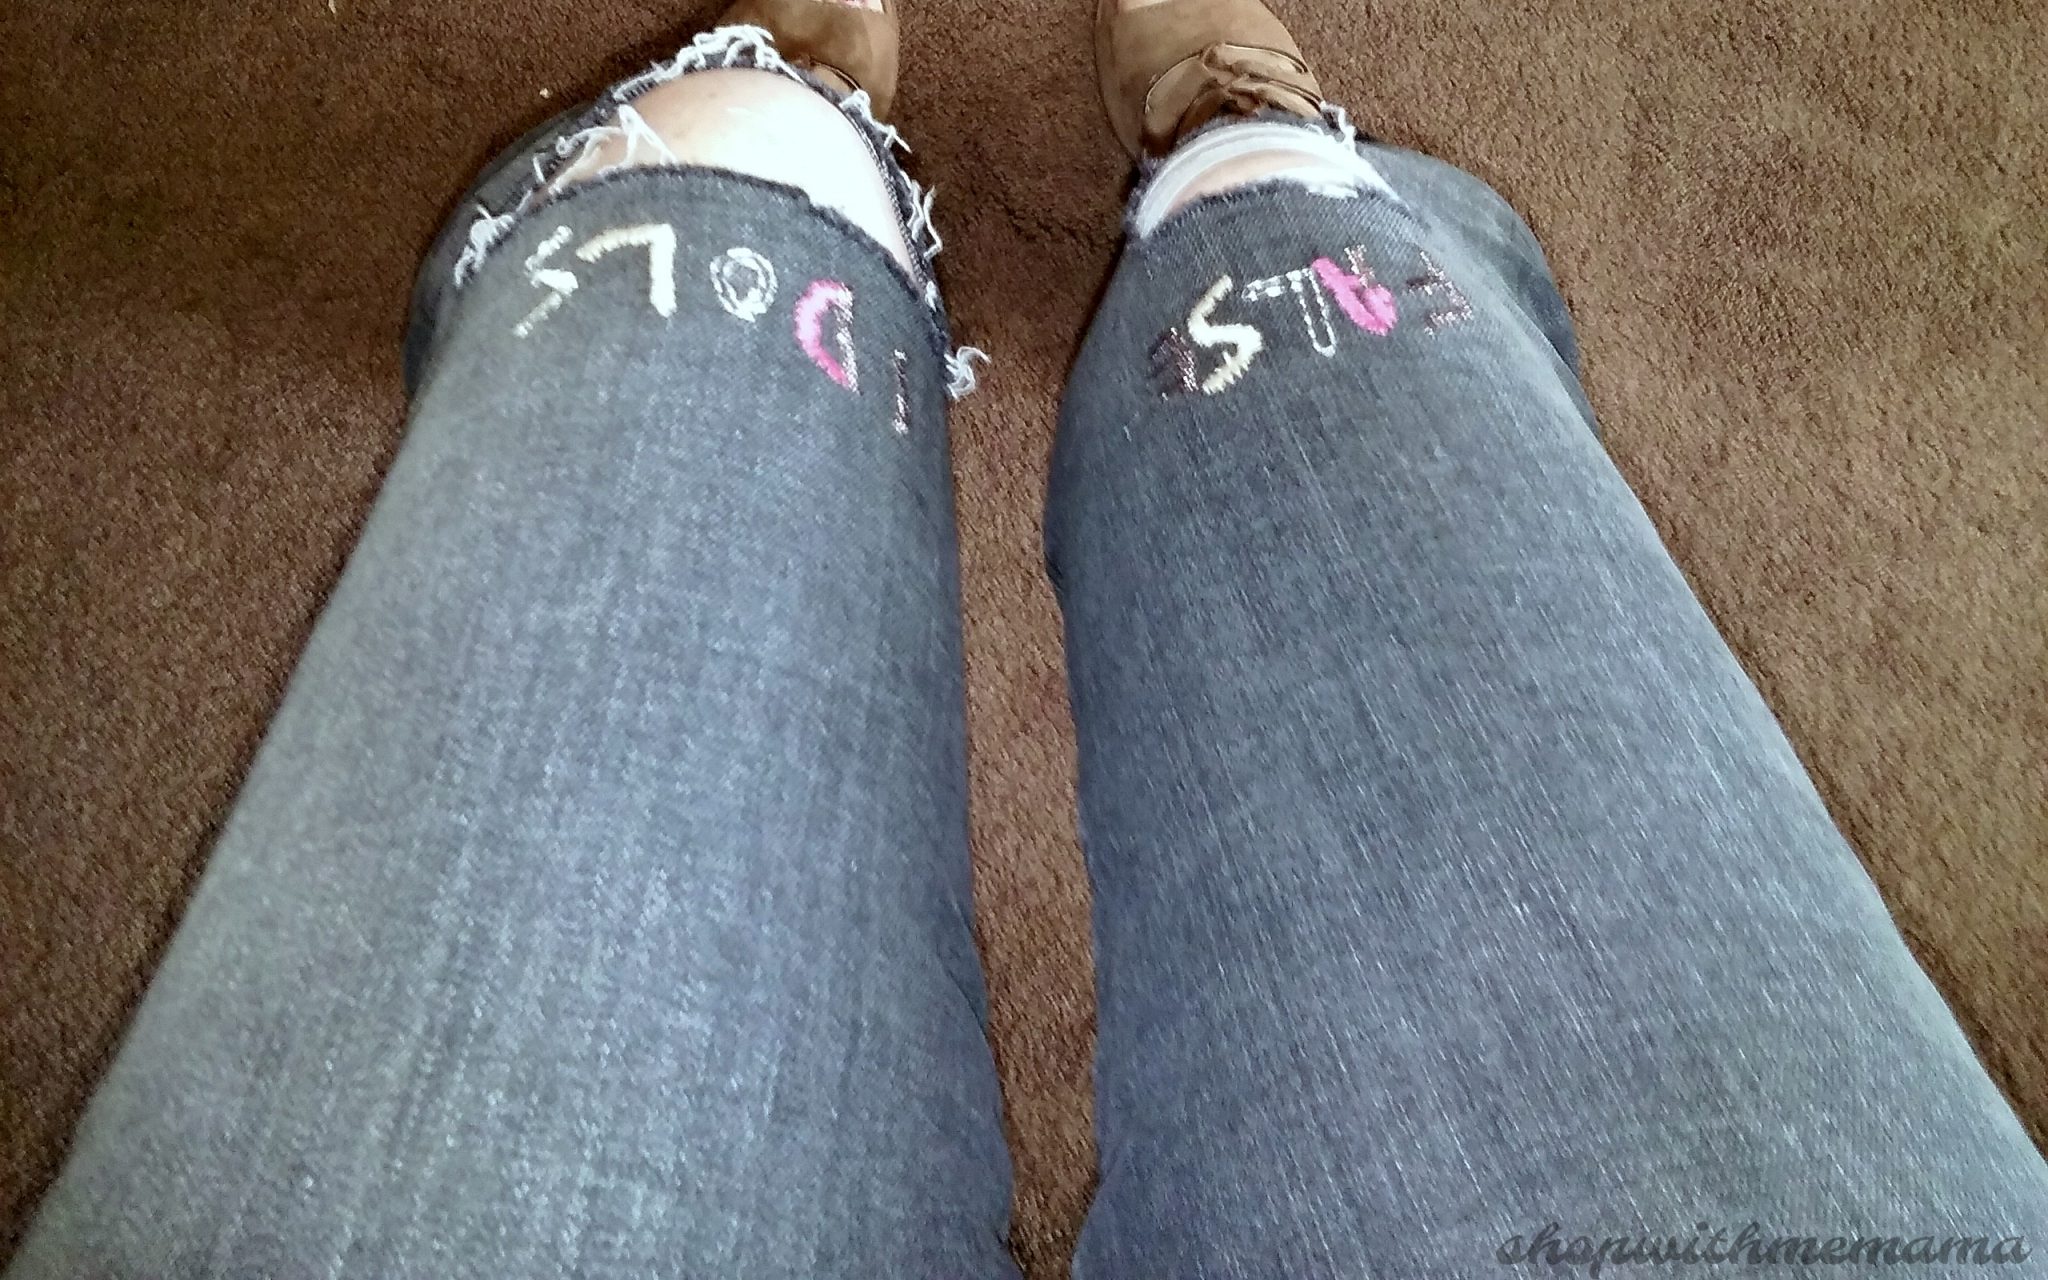 Check Out These Hot Jeans From Hudson Jeans!